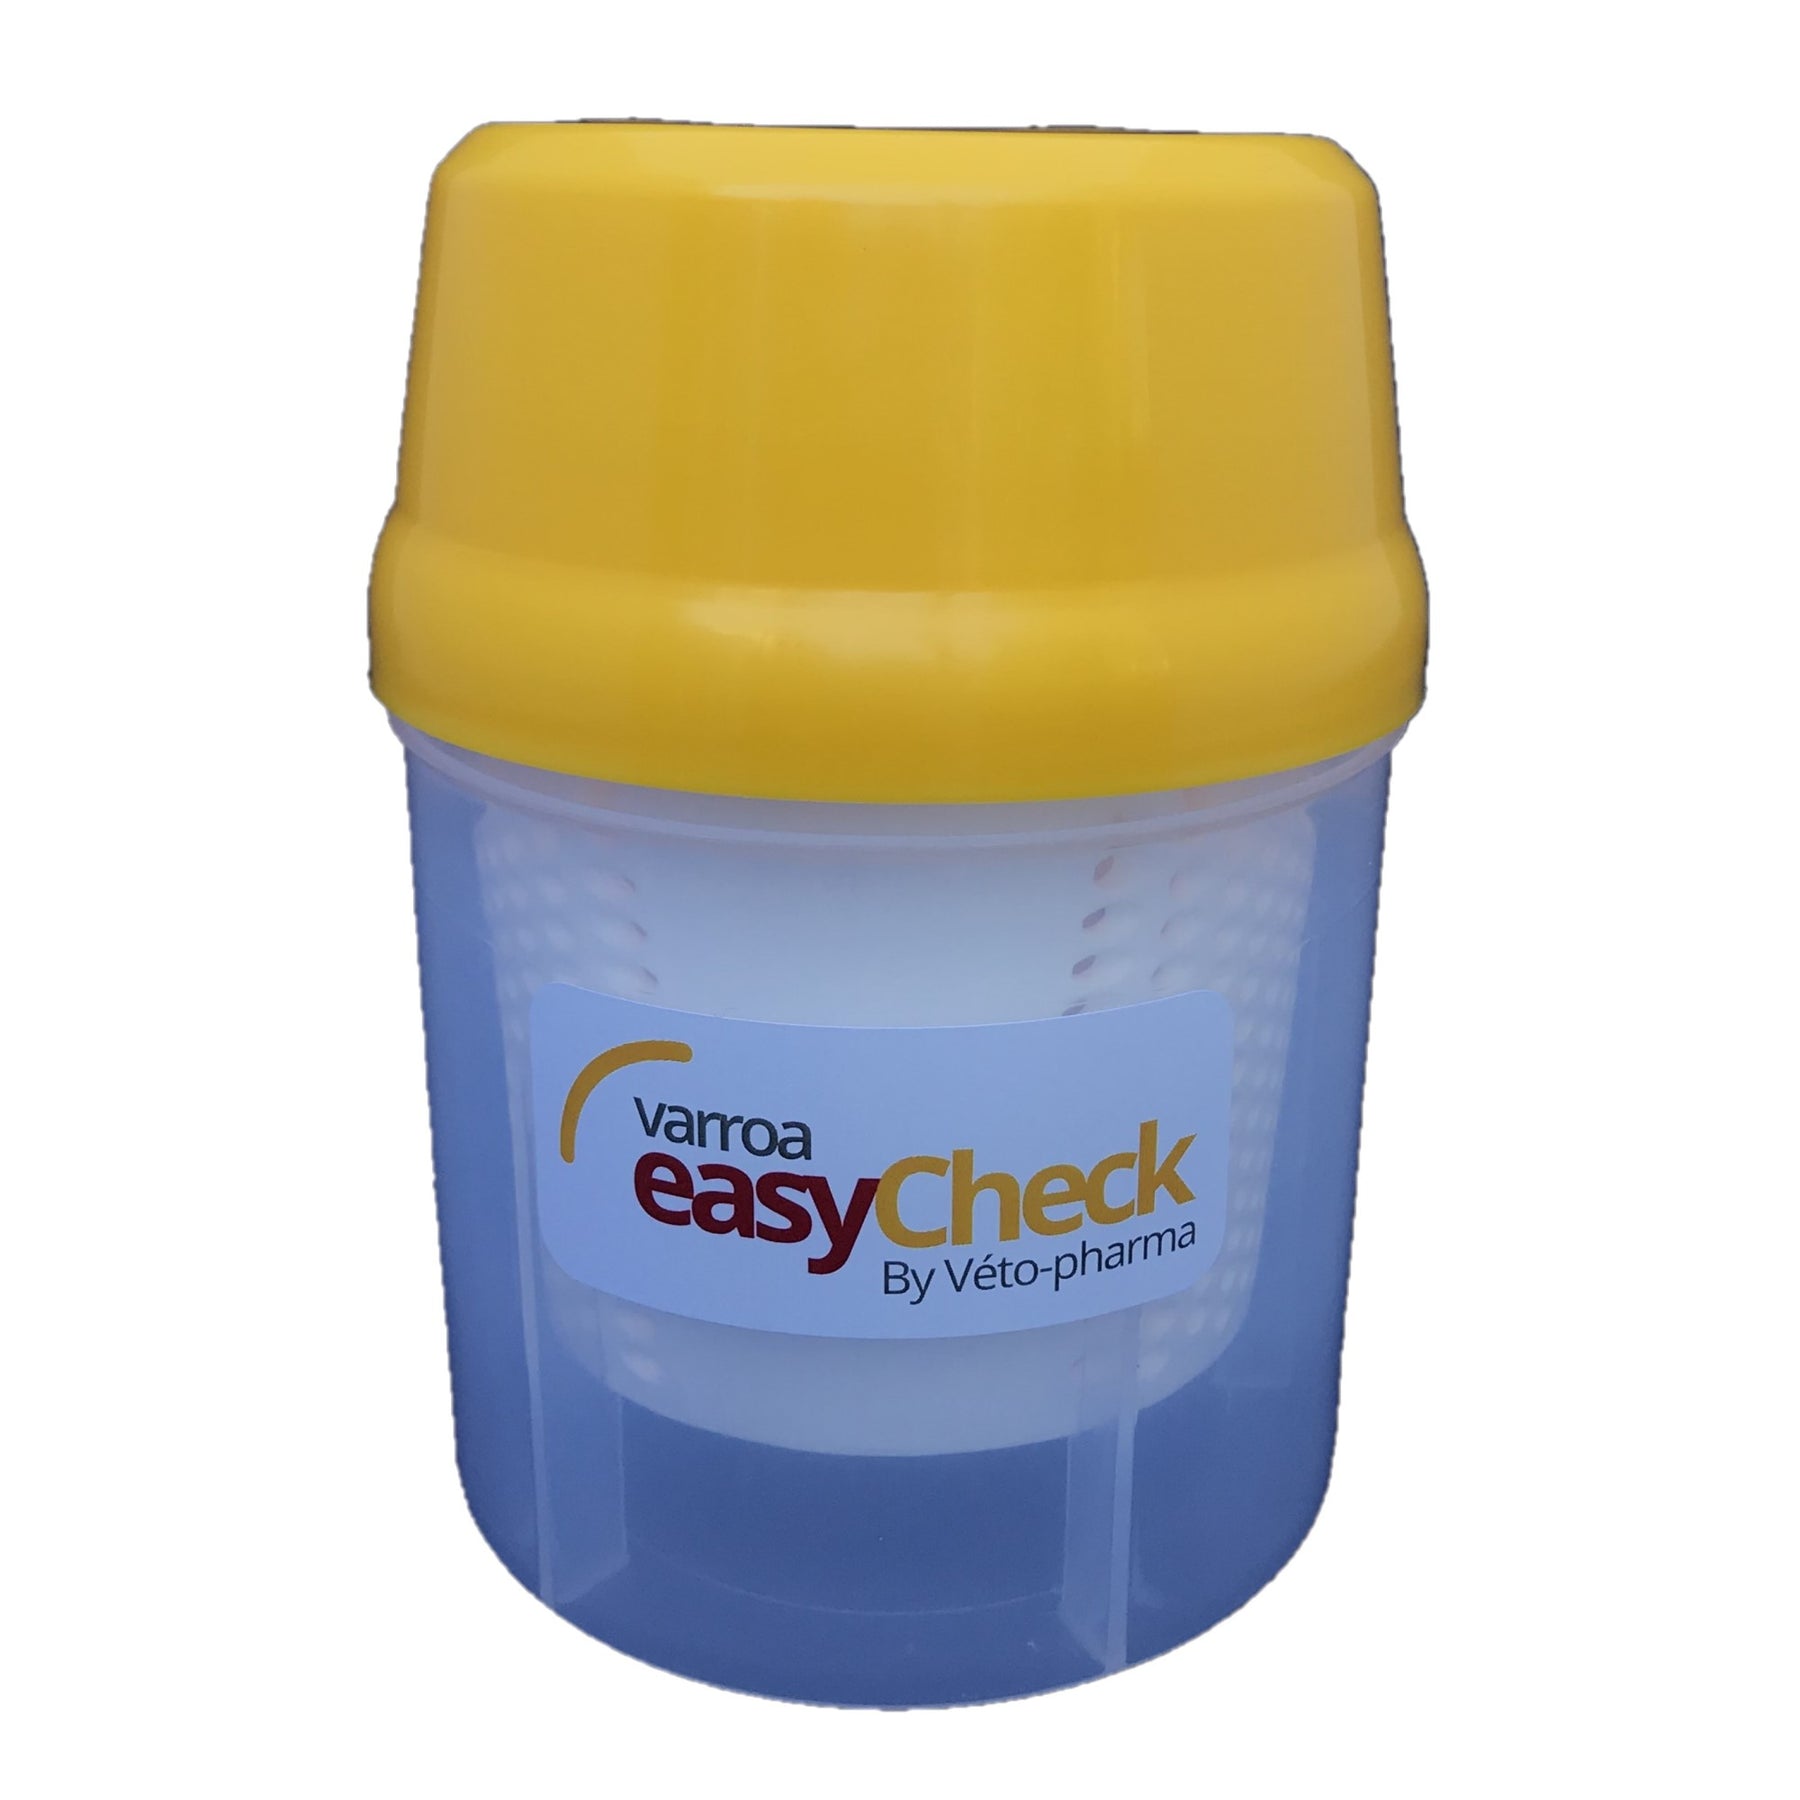 Photo of Varroa EasyCheck container.